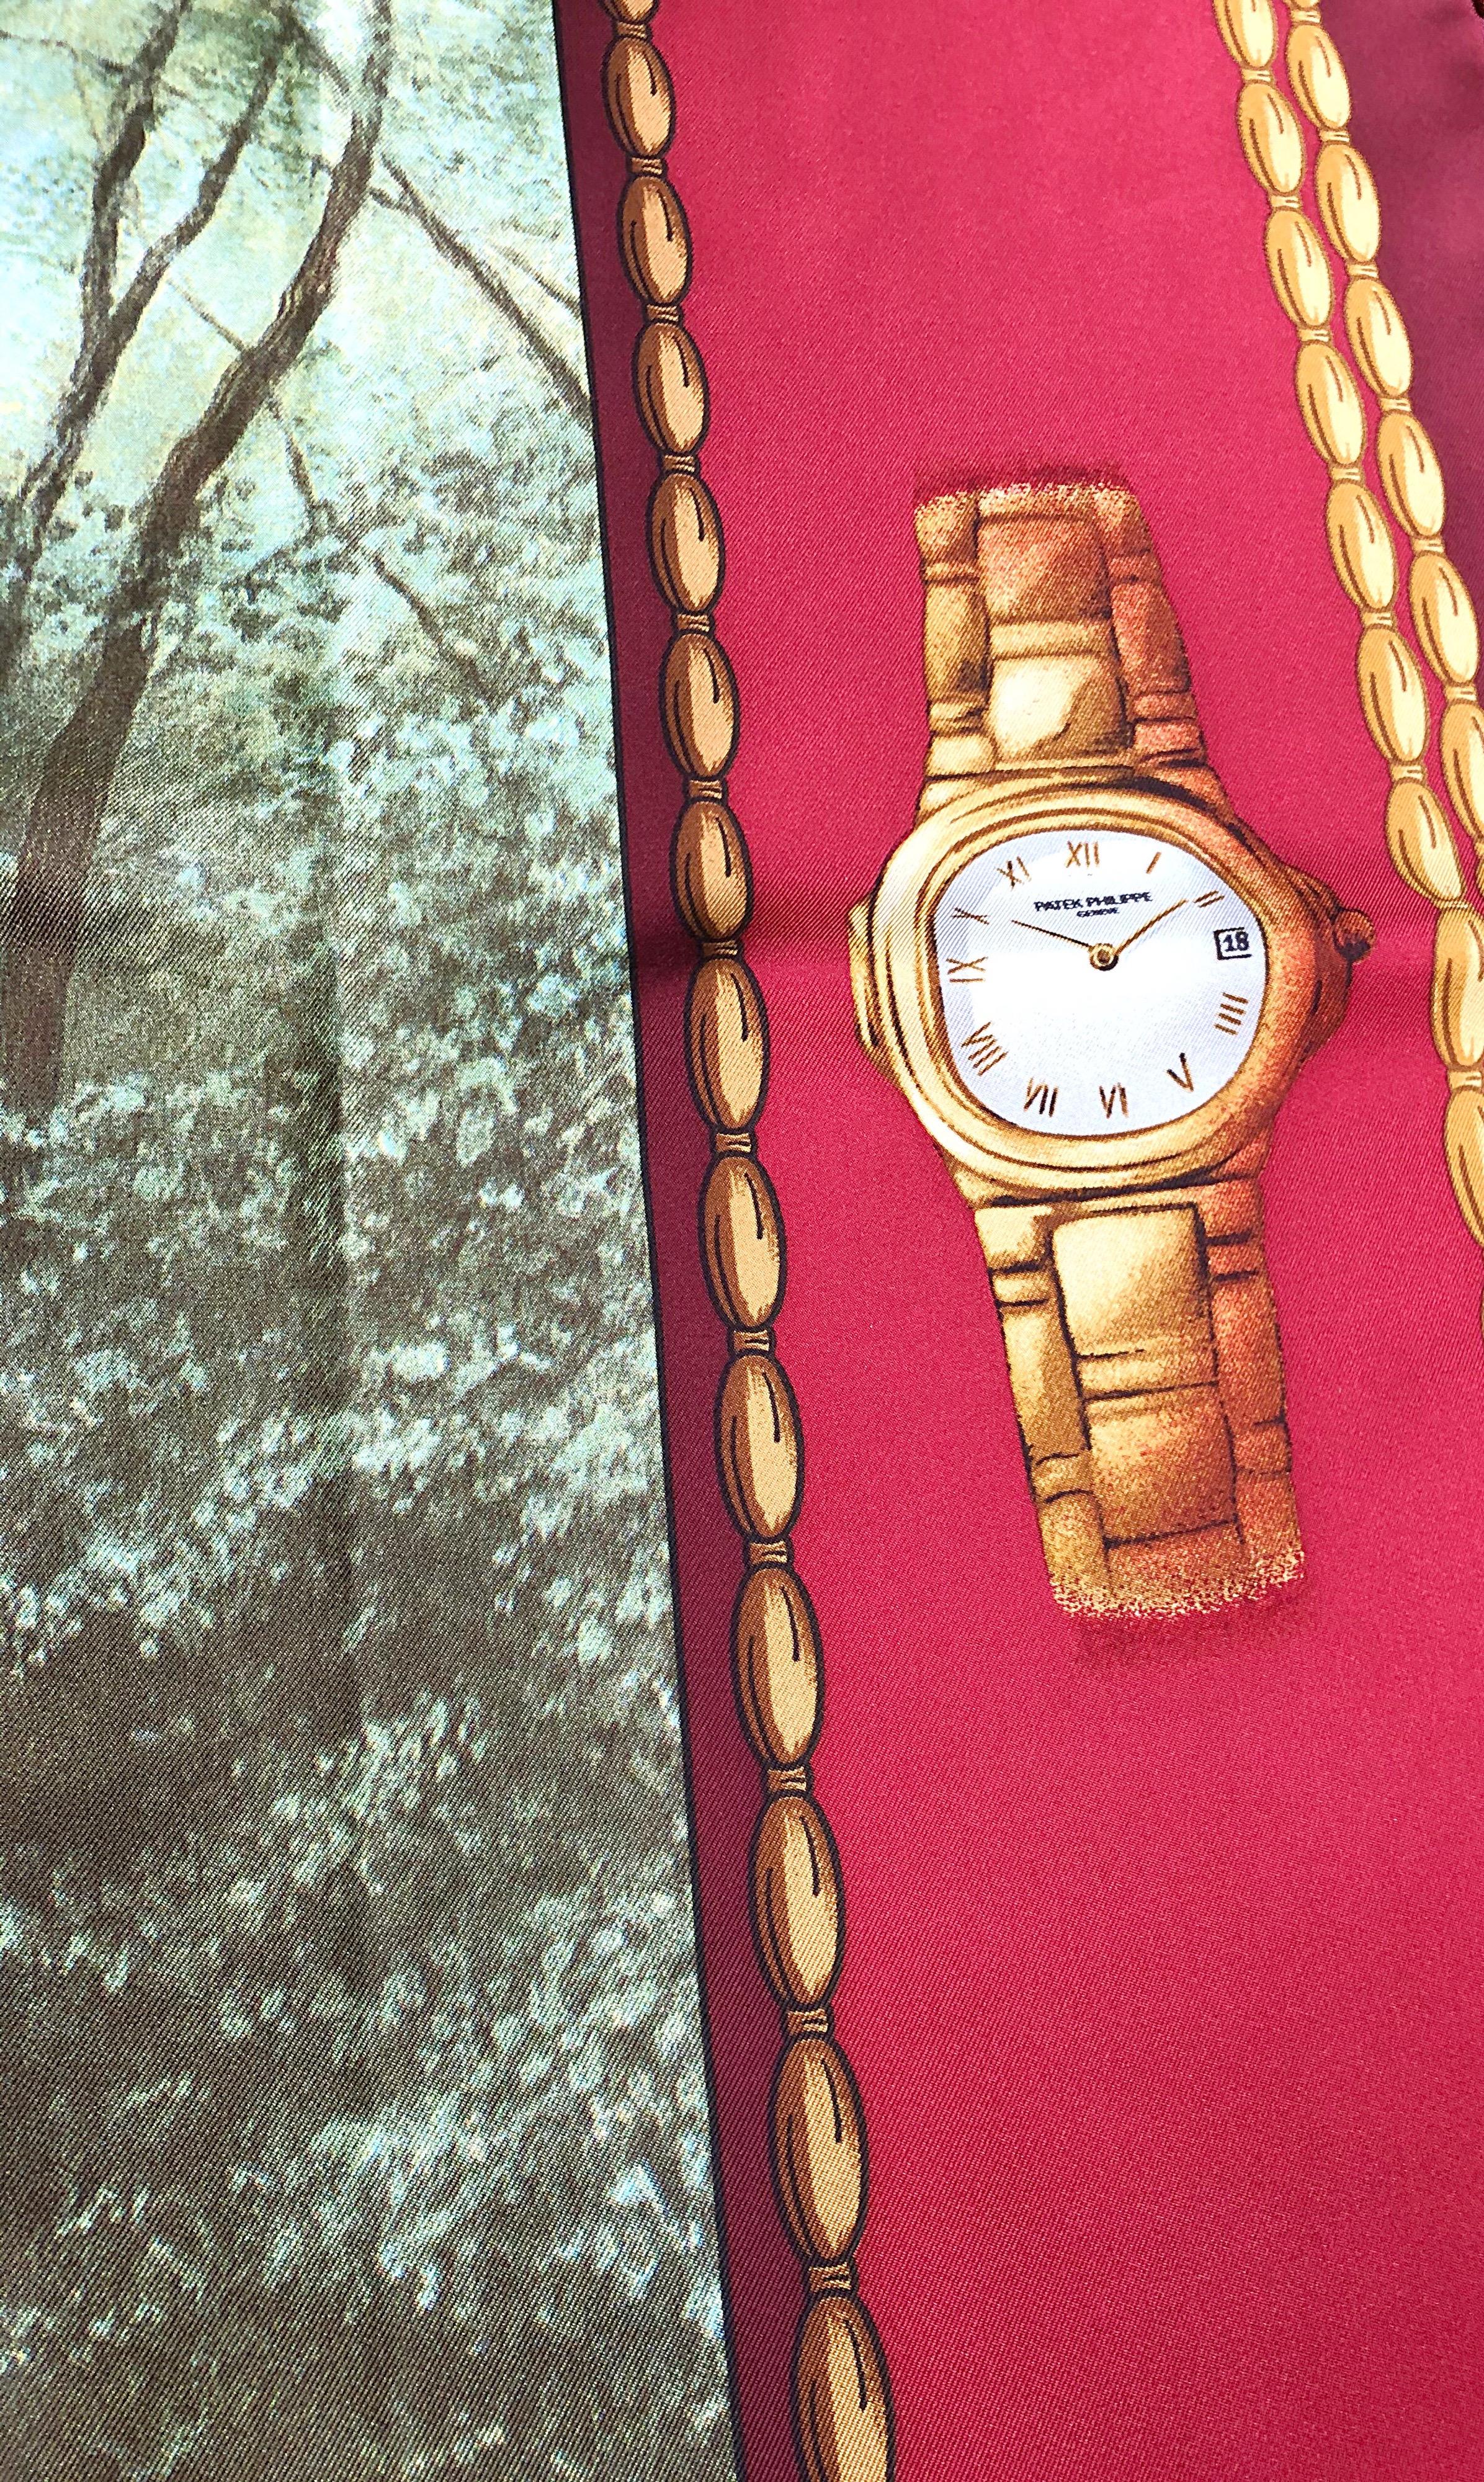 New Patek Philippe 1990s Novelty Watch Print 34 x 34 Vintage Silk Scarf with Box In New Condition For Sale In San Diego, CA